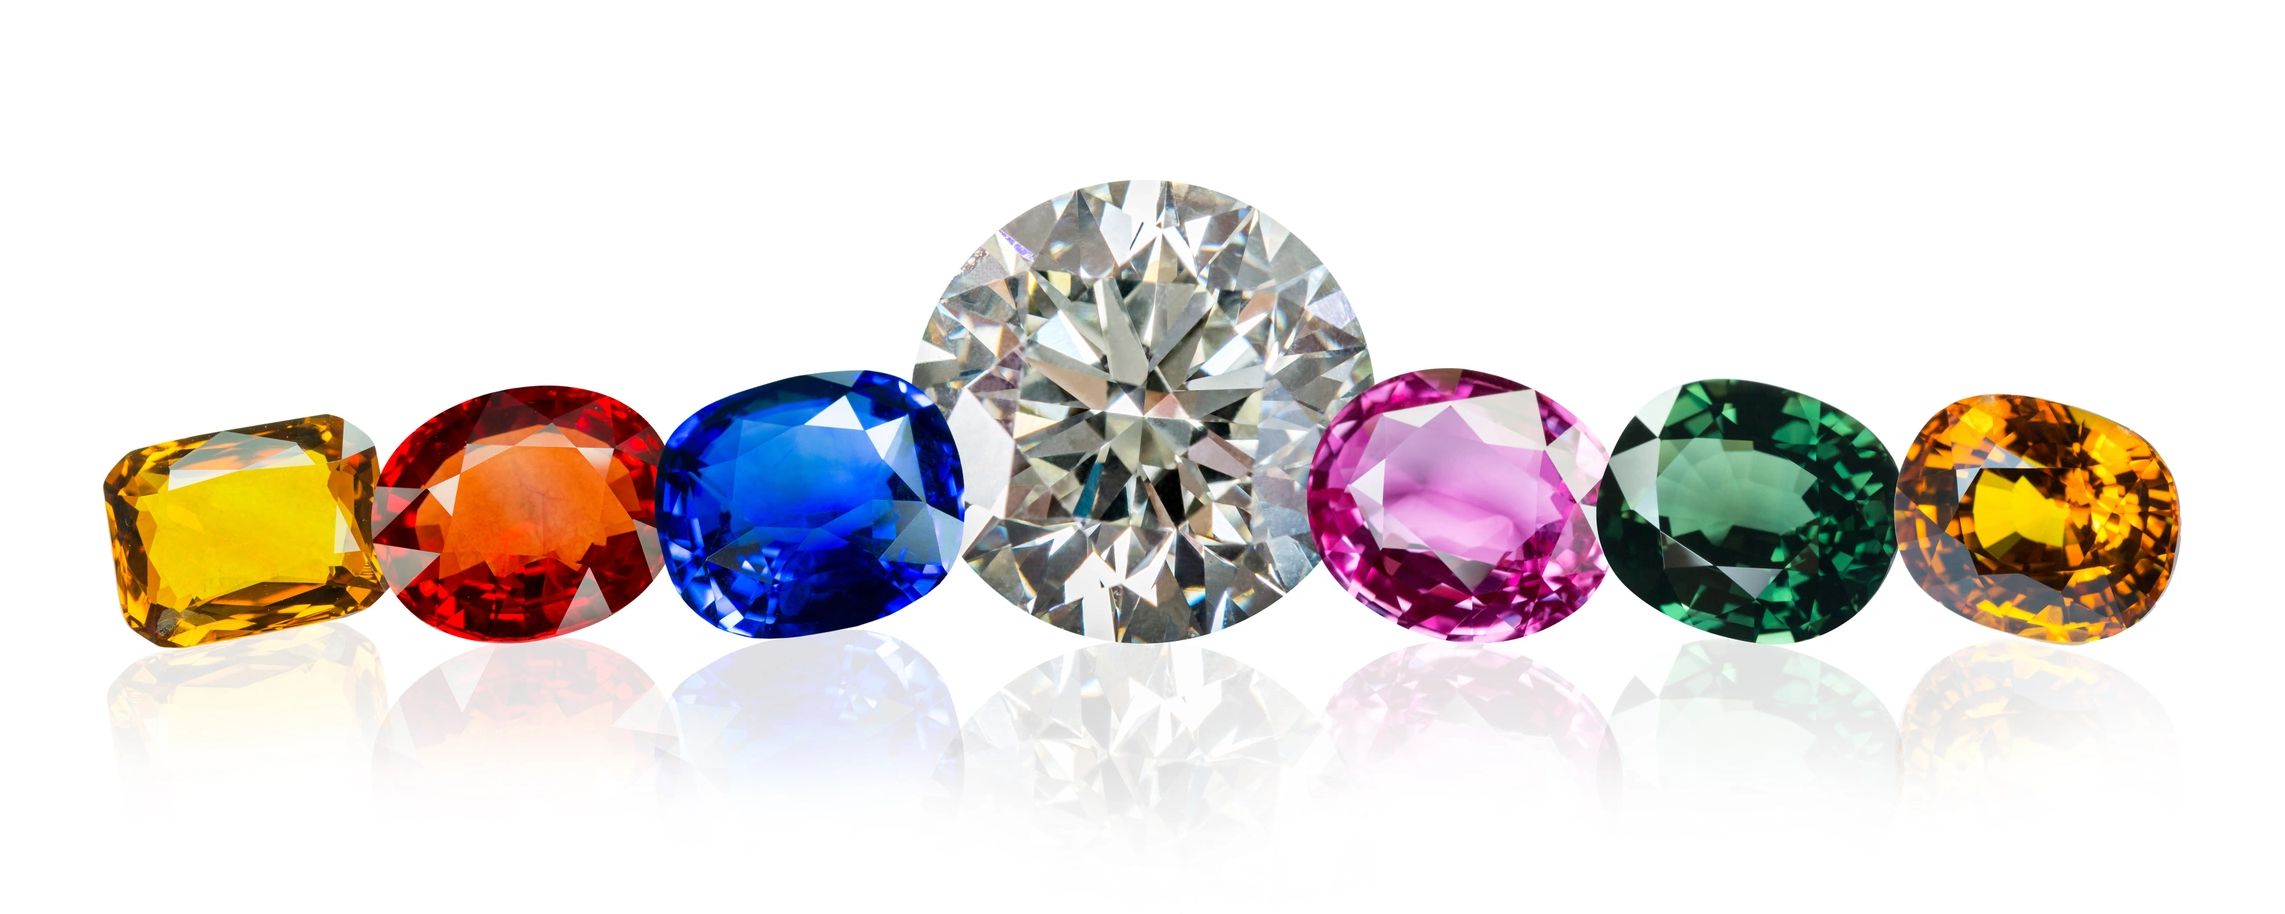 Gemstones lined next to each other with a large diamond in the center